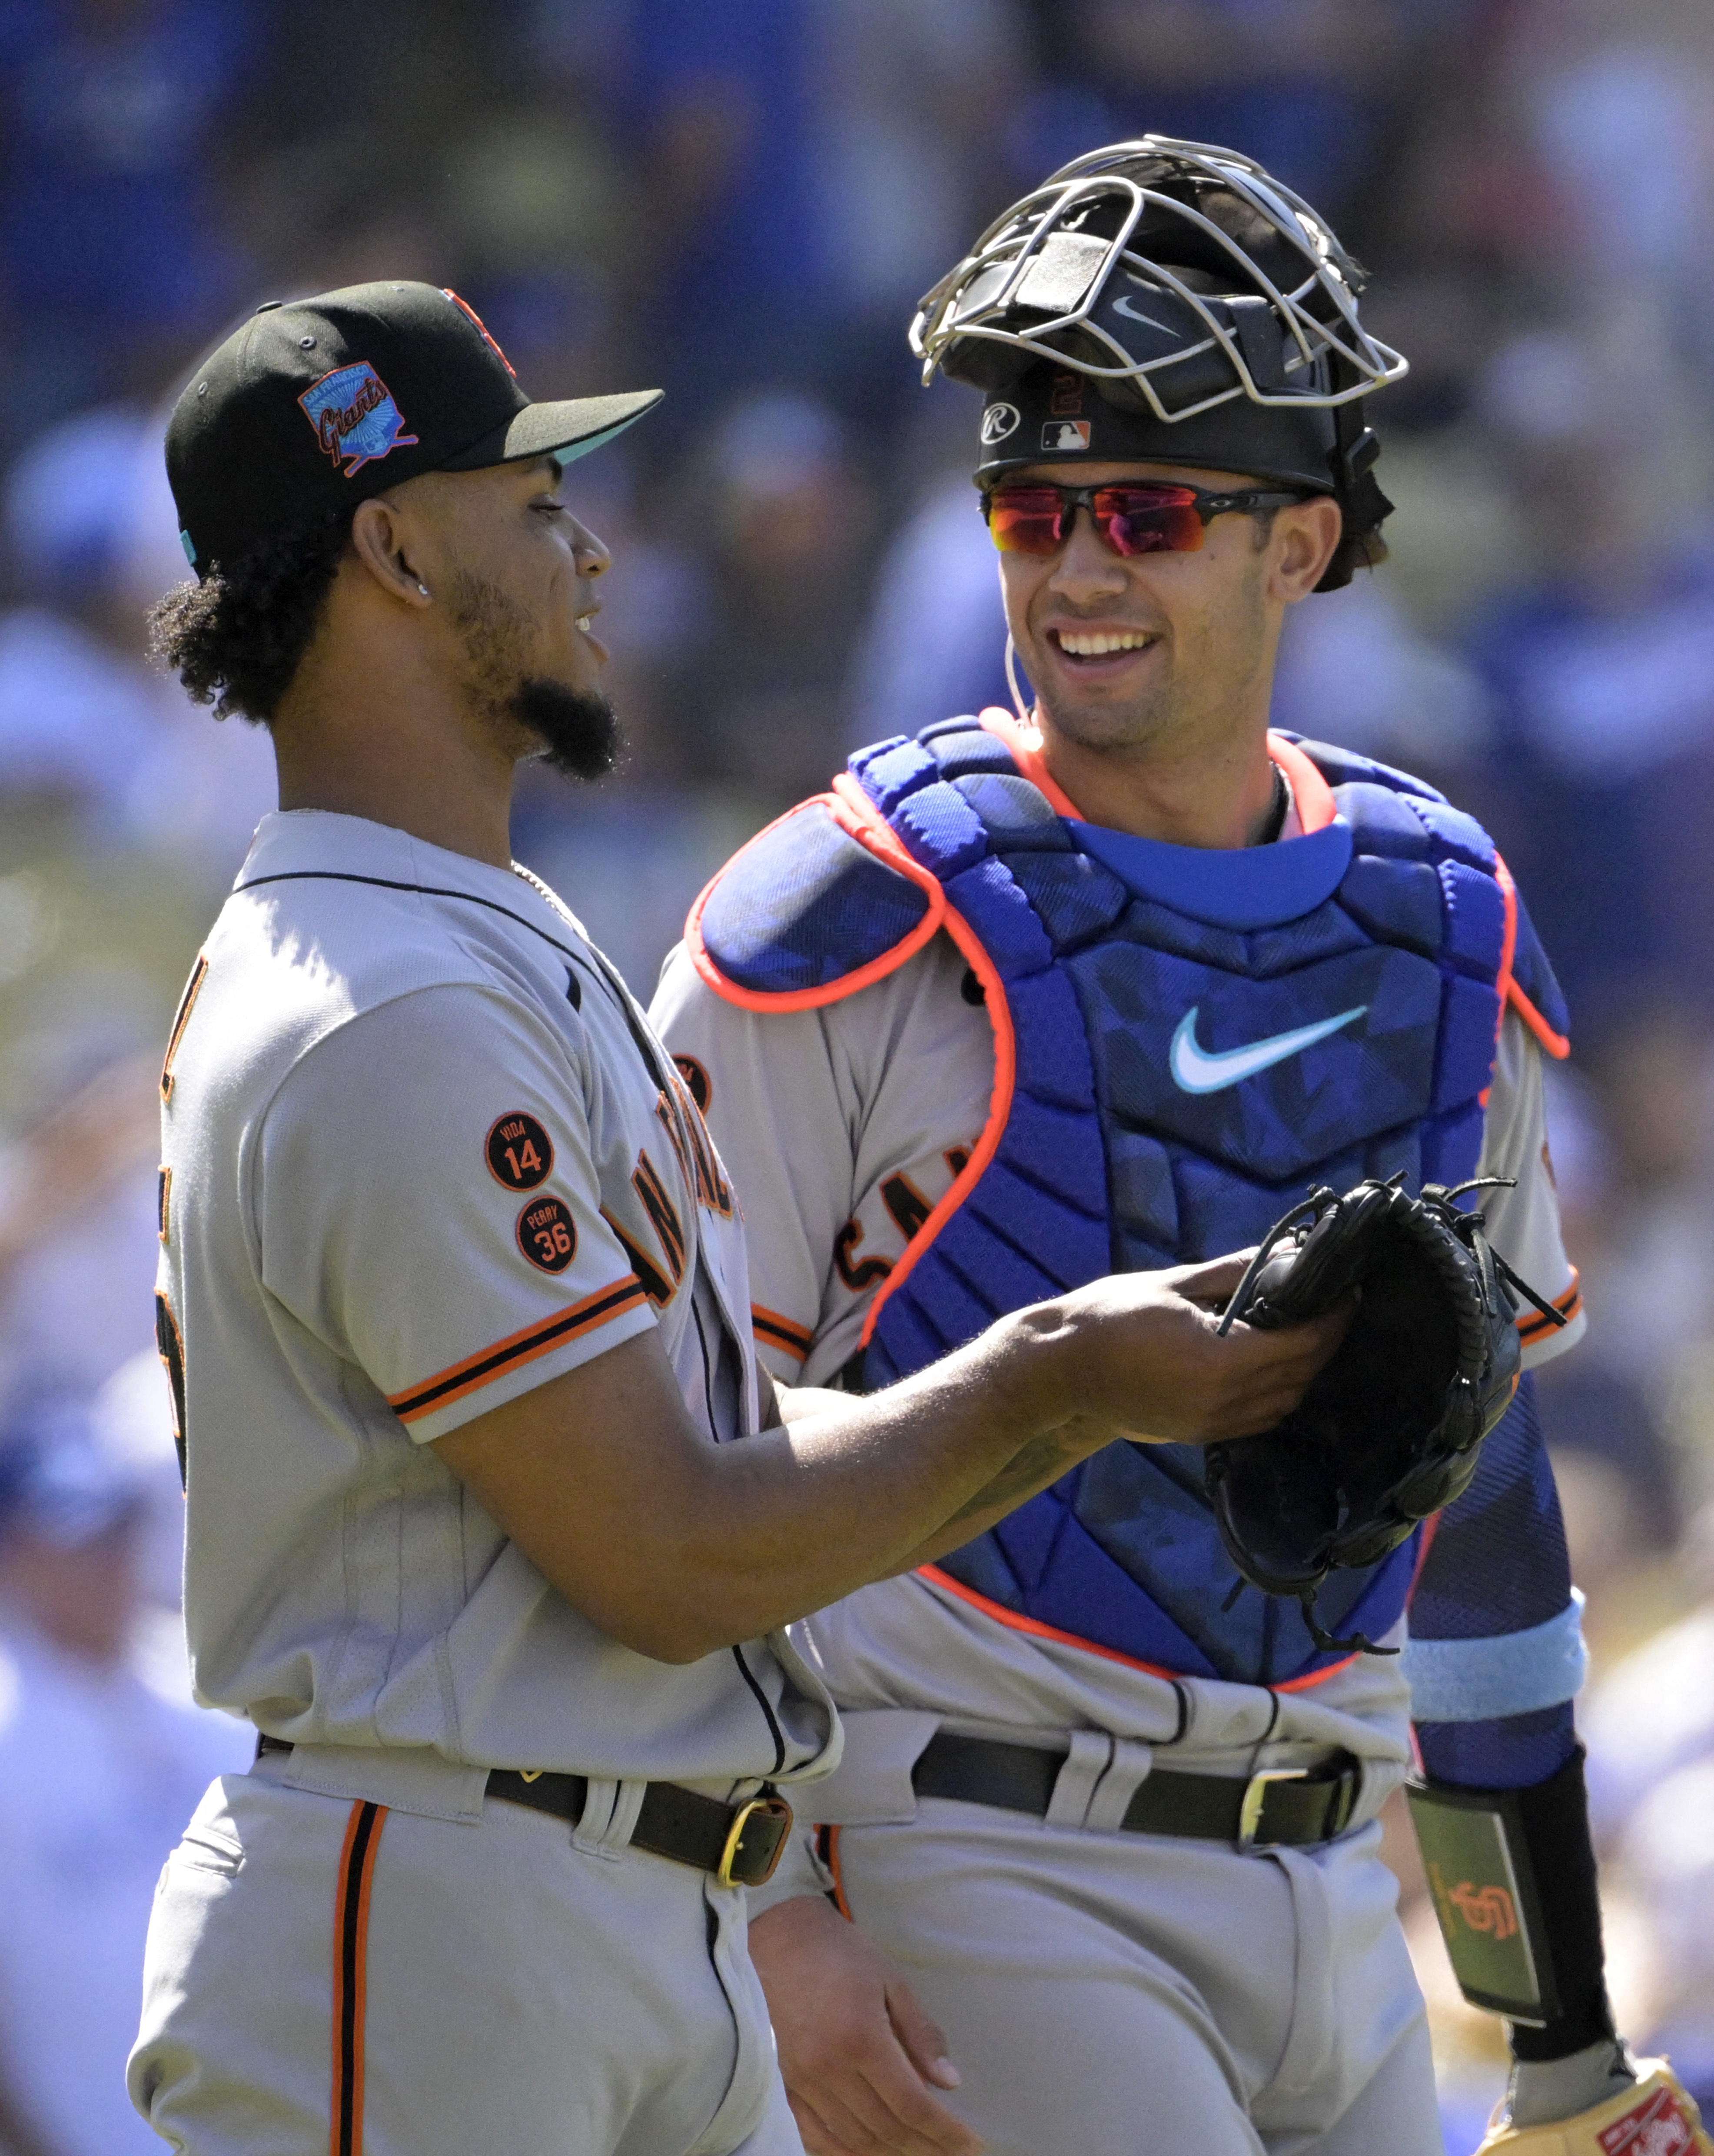 Giants sweep Dodgers for seventh straight win